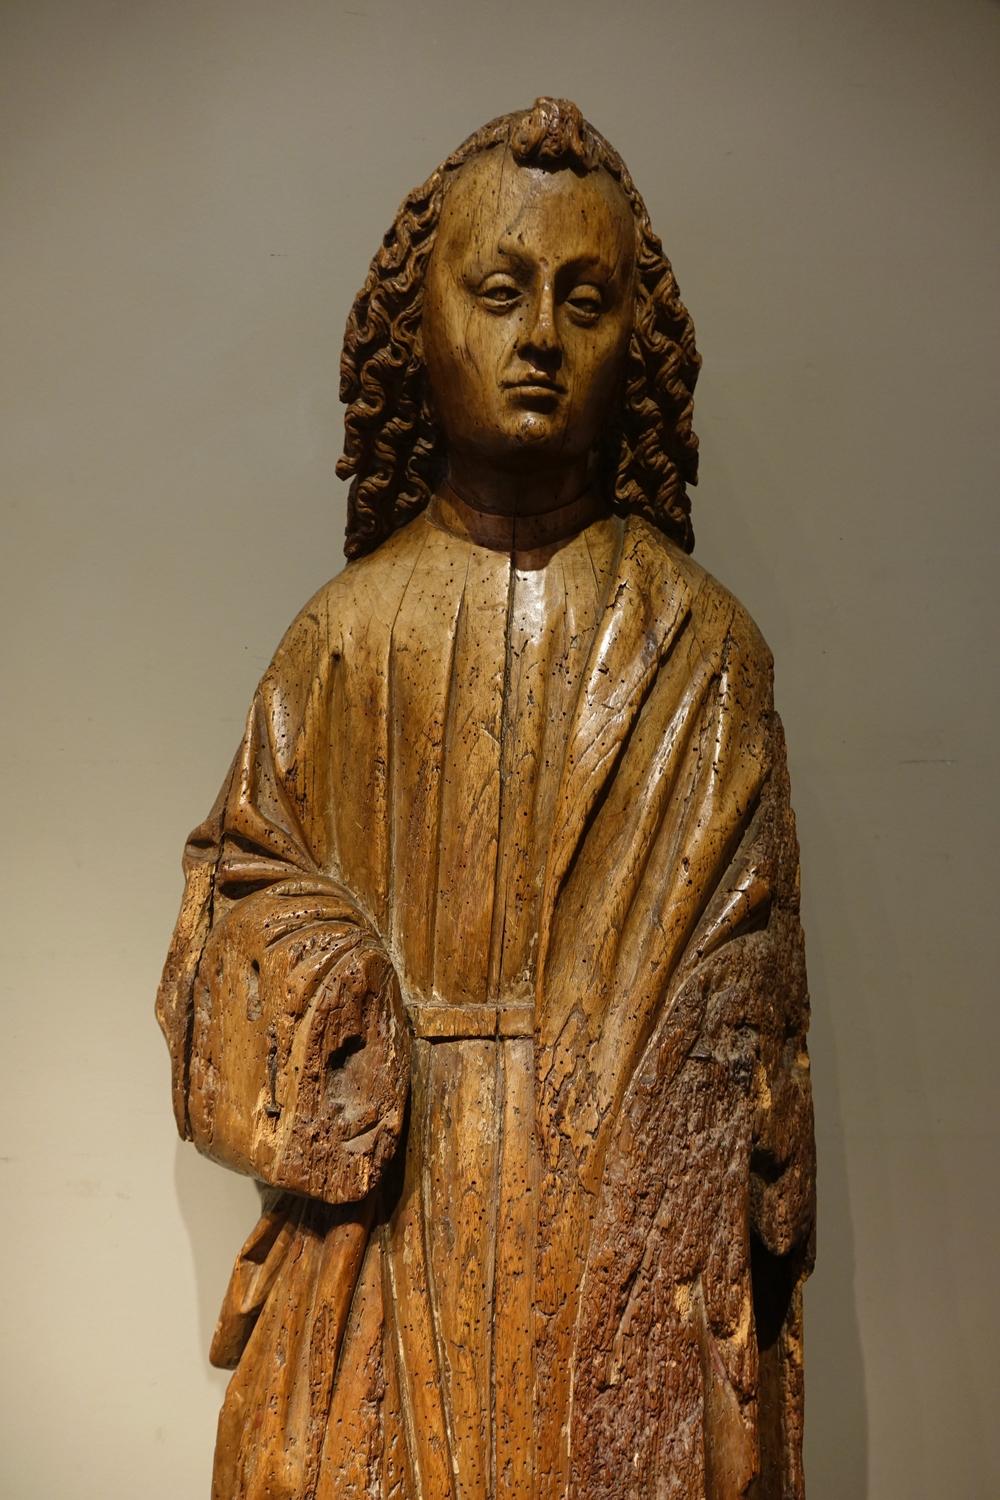 Large walnut wood sculpture in the round, depicting Saint John in the position he usually has at the foot of Christ on the Cross.
Beautifully expressive face, framed by expertly curled hair.
Visible erosion and missing parts, but a fine